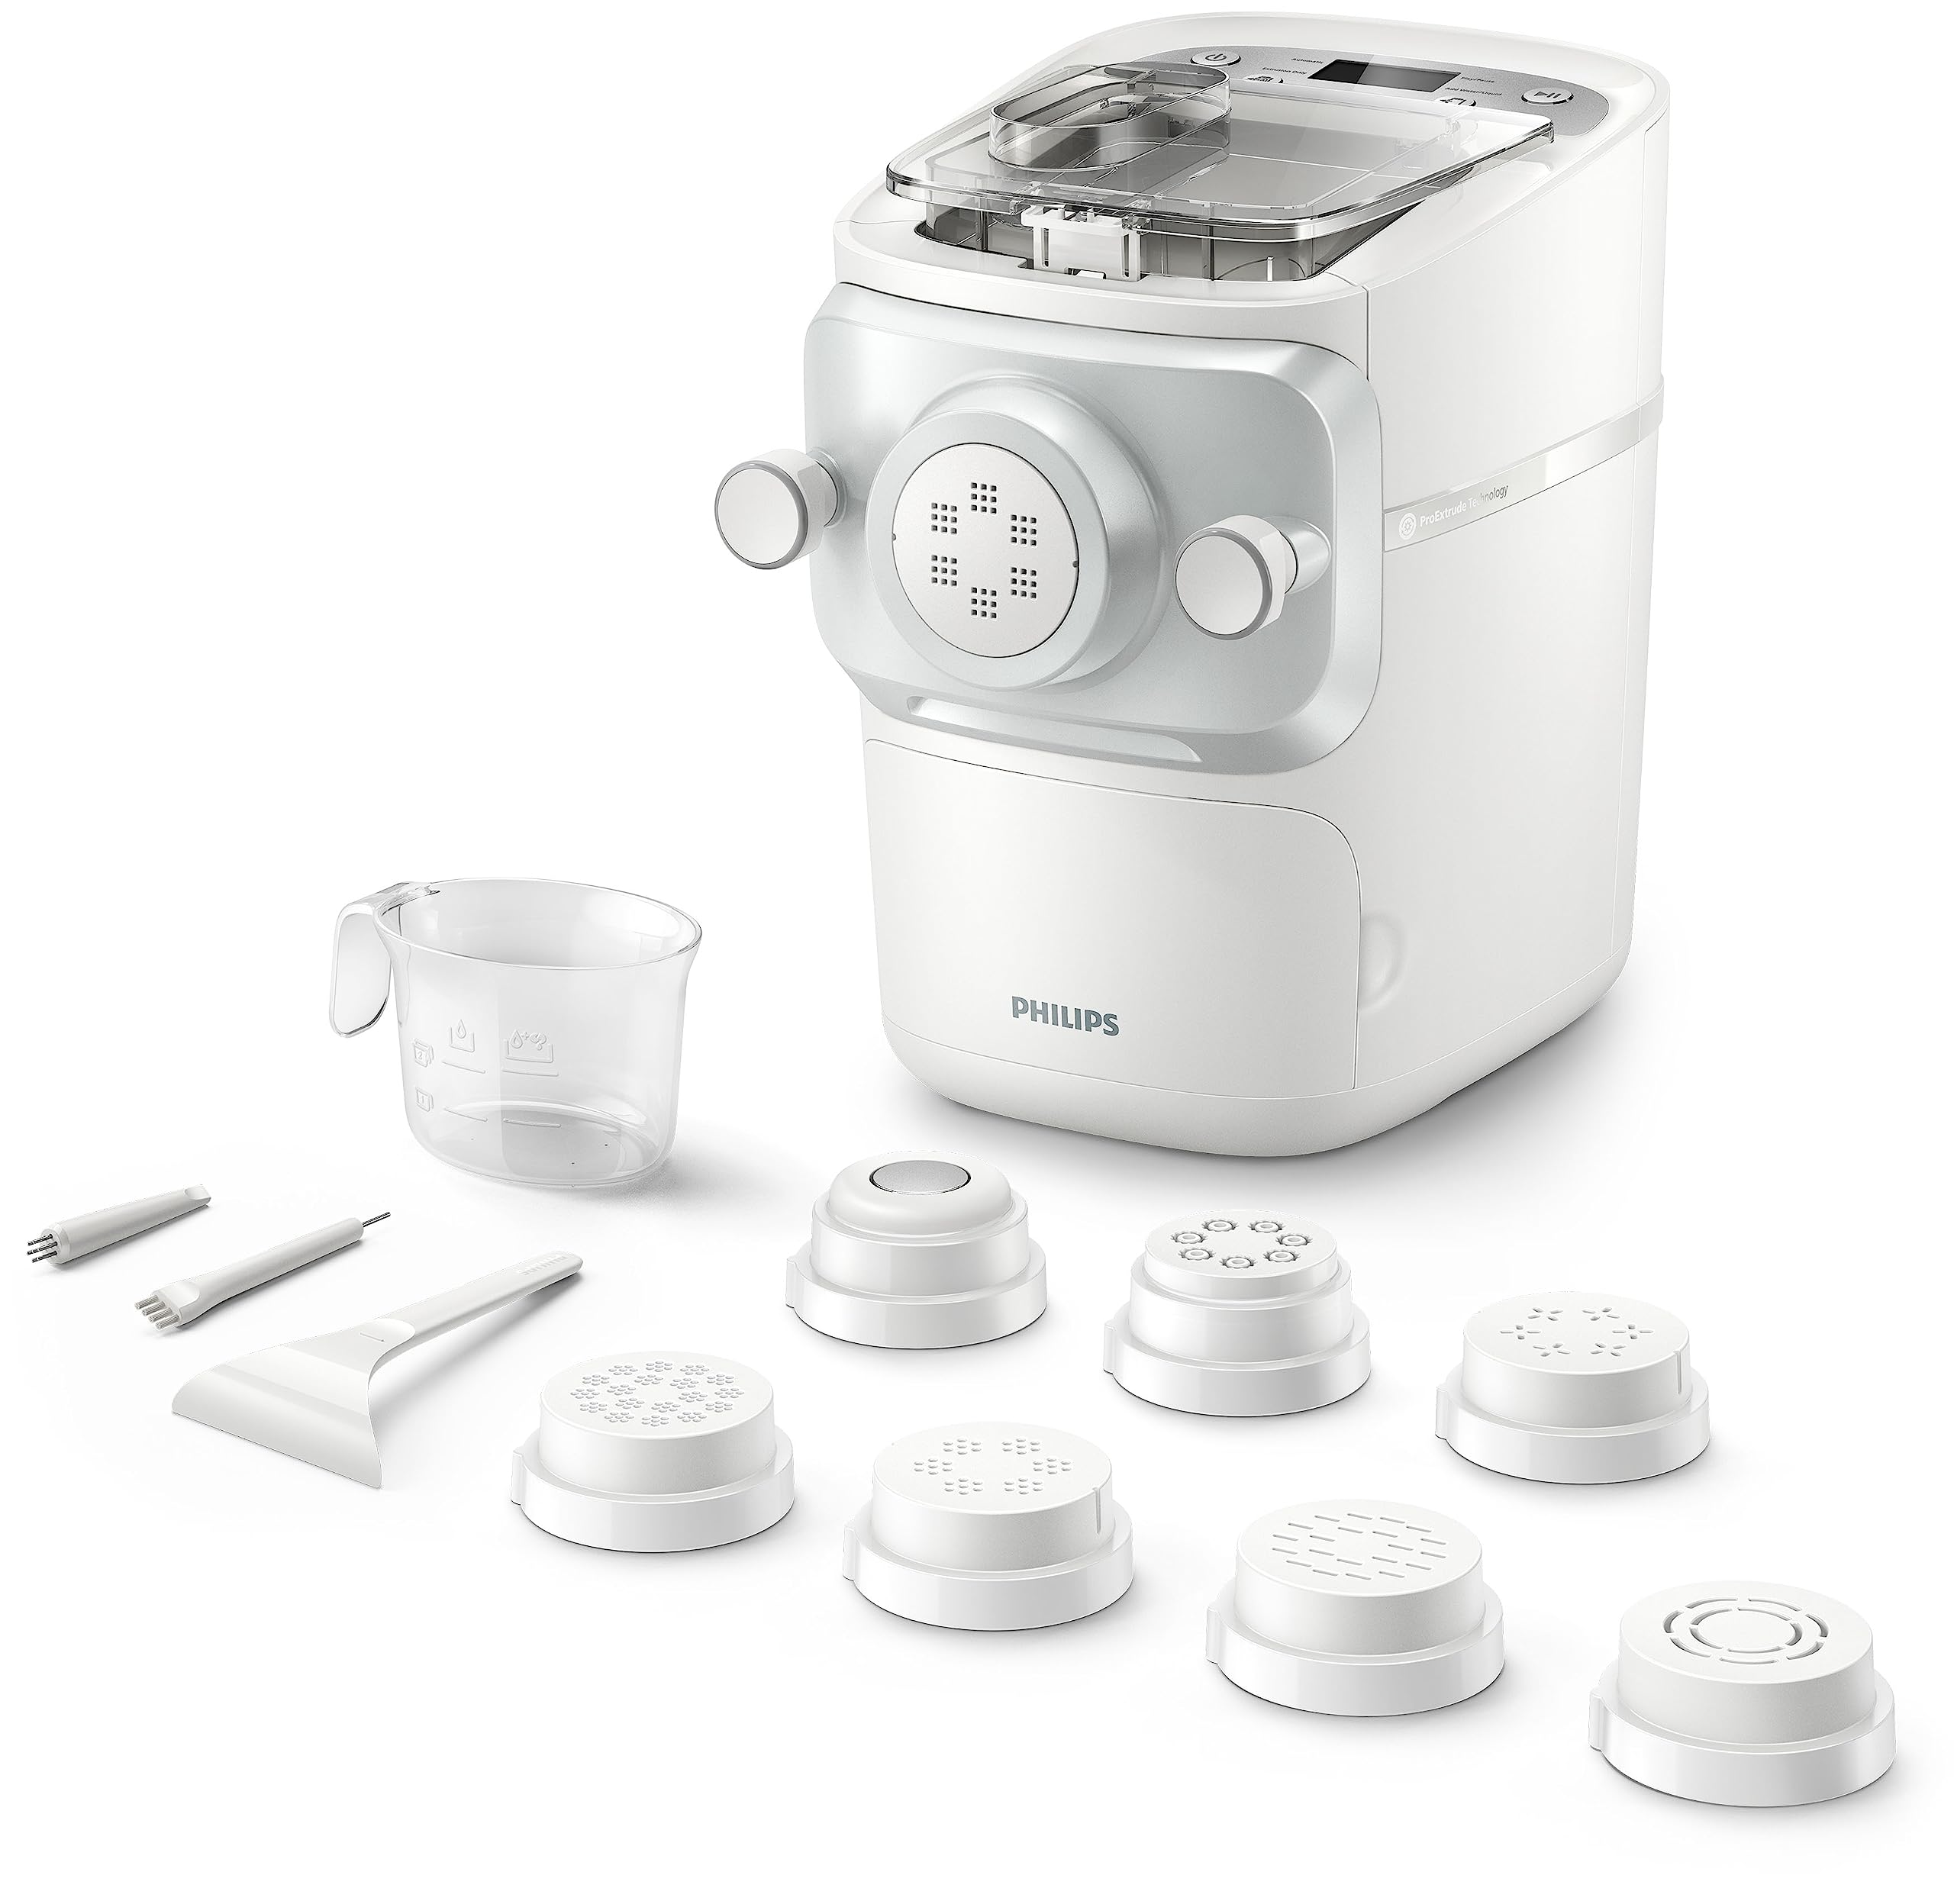 Philips 7000 Series Pasta Maker, ProExtrude Technology 150W, 8 discs, Up to 8 Portions, NutriU App, White, (HR2660/03)